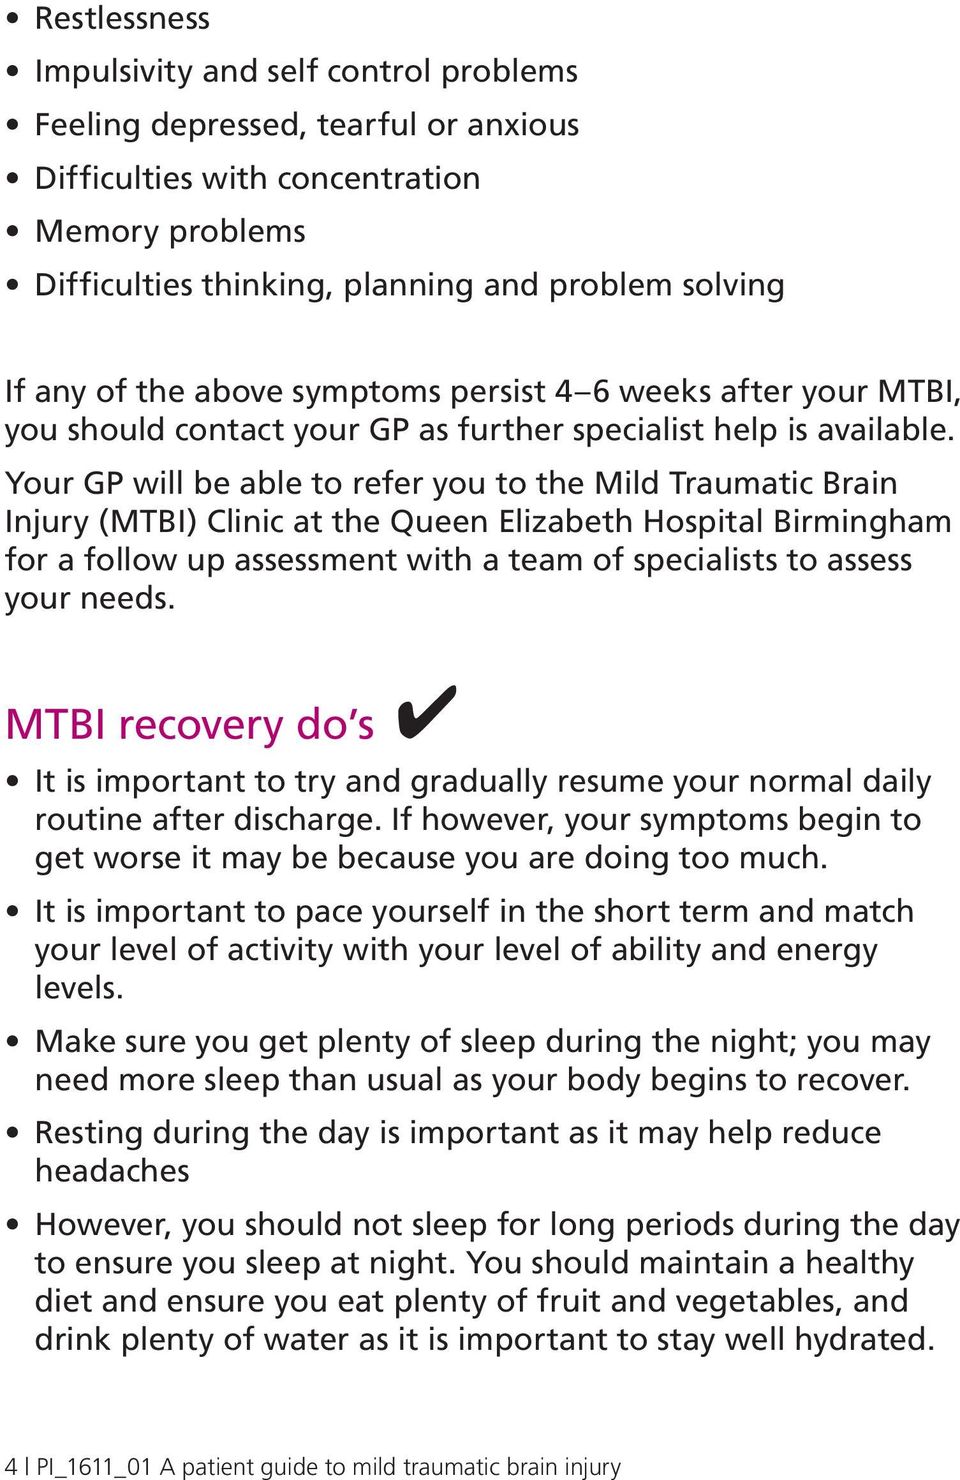 Your GP will be able to refer you to the Mild Traumatic Brain Injury (MTBI) Clinic at the Queen Elizabeth Hospital Birmingham for a follow up assessment with a team of specialists to assess your